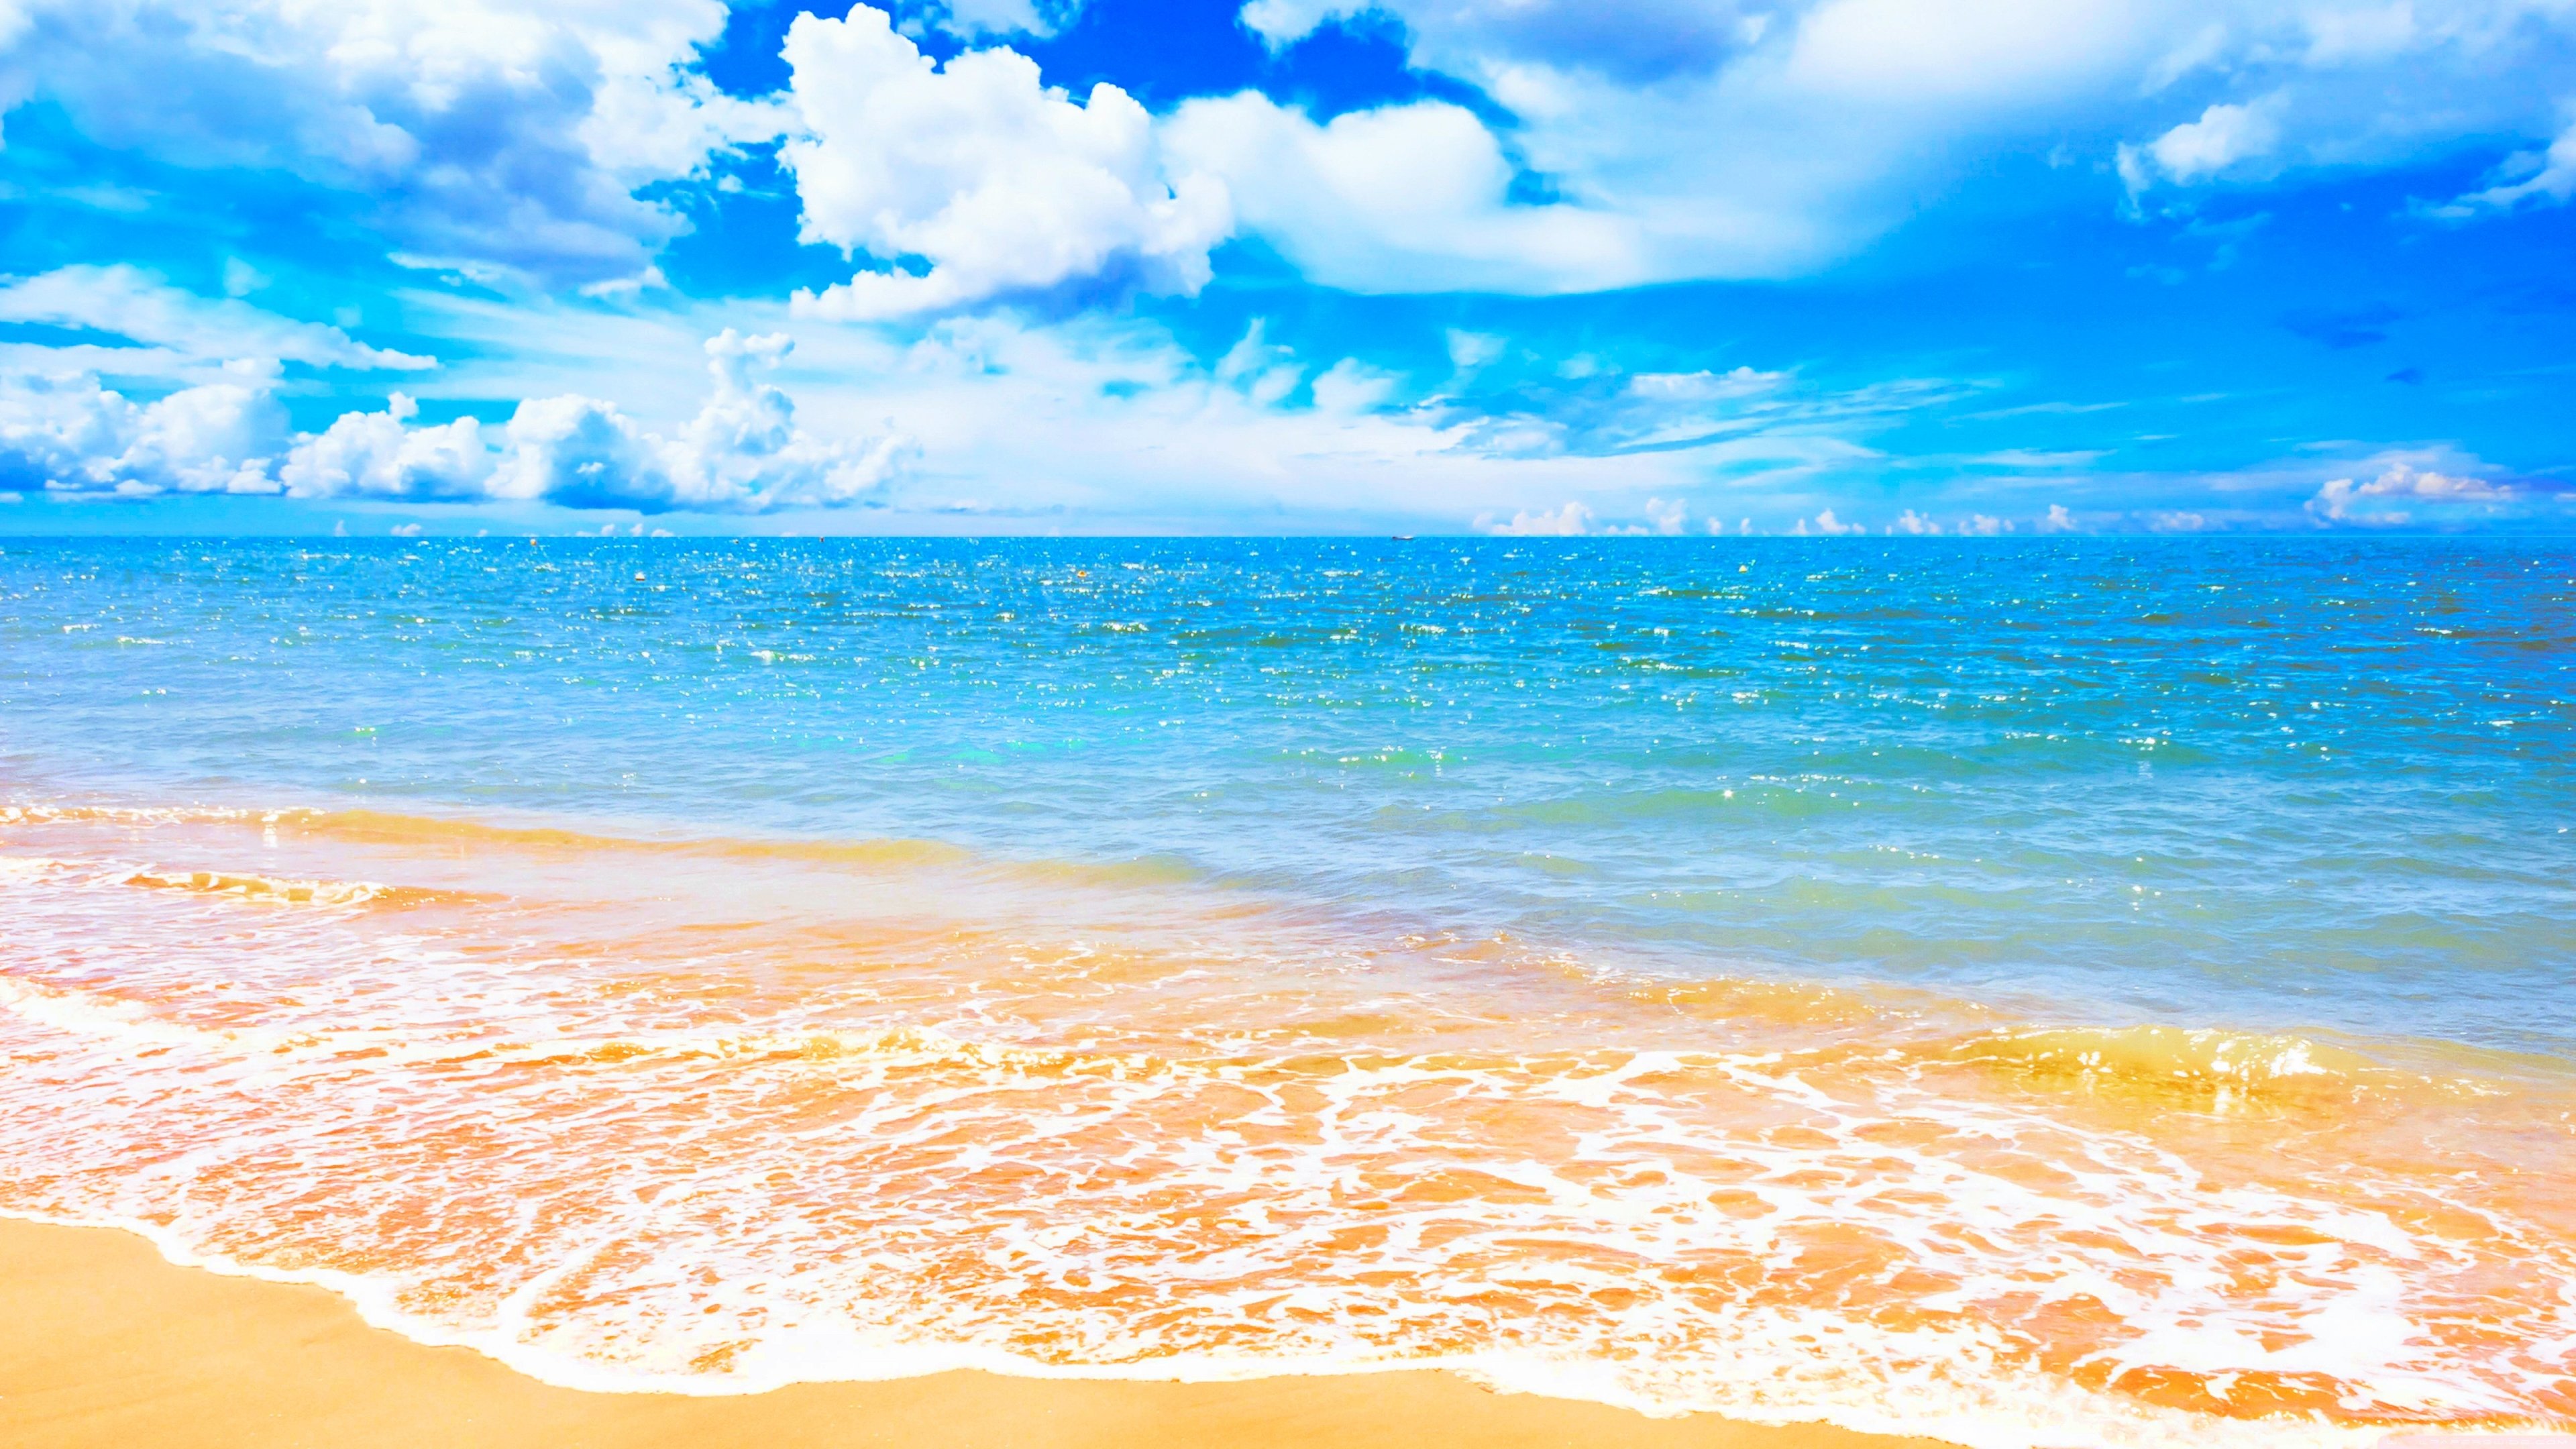 Summer Beach Wallpapers Summer Beach Wallpapers Wallpaper Cave Here